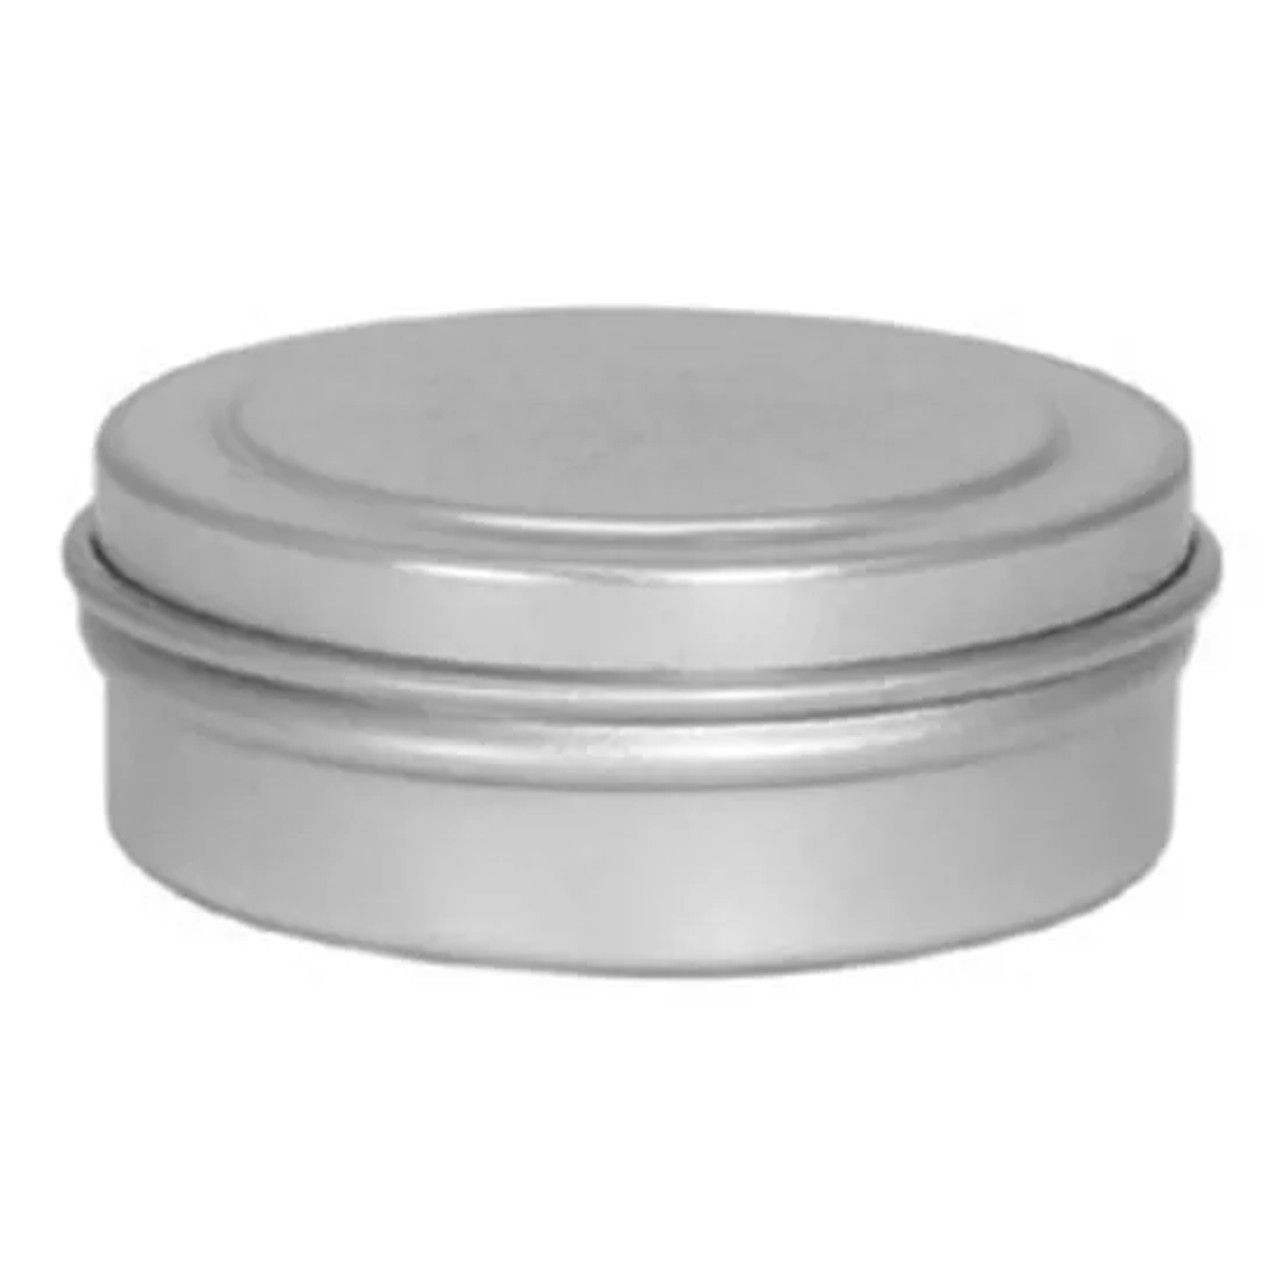 16 oz Round Tin Container with Clear Top Slip on Lid